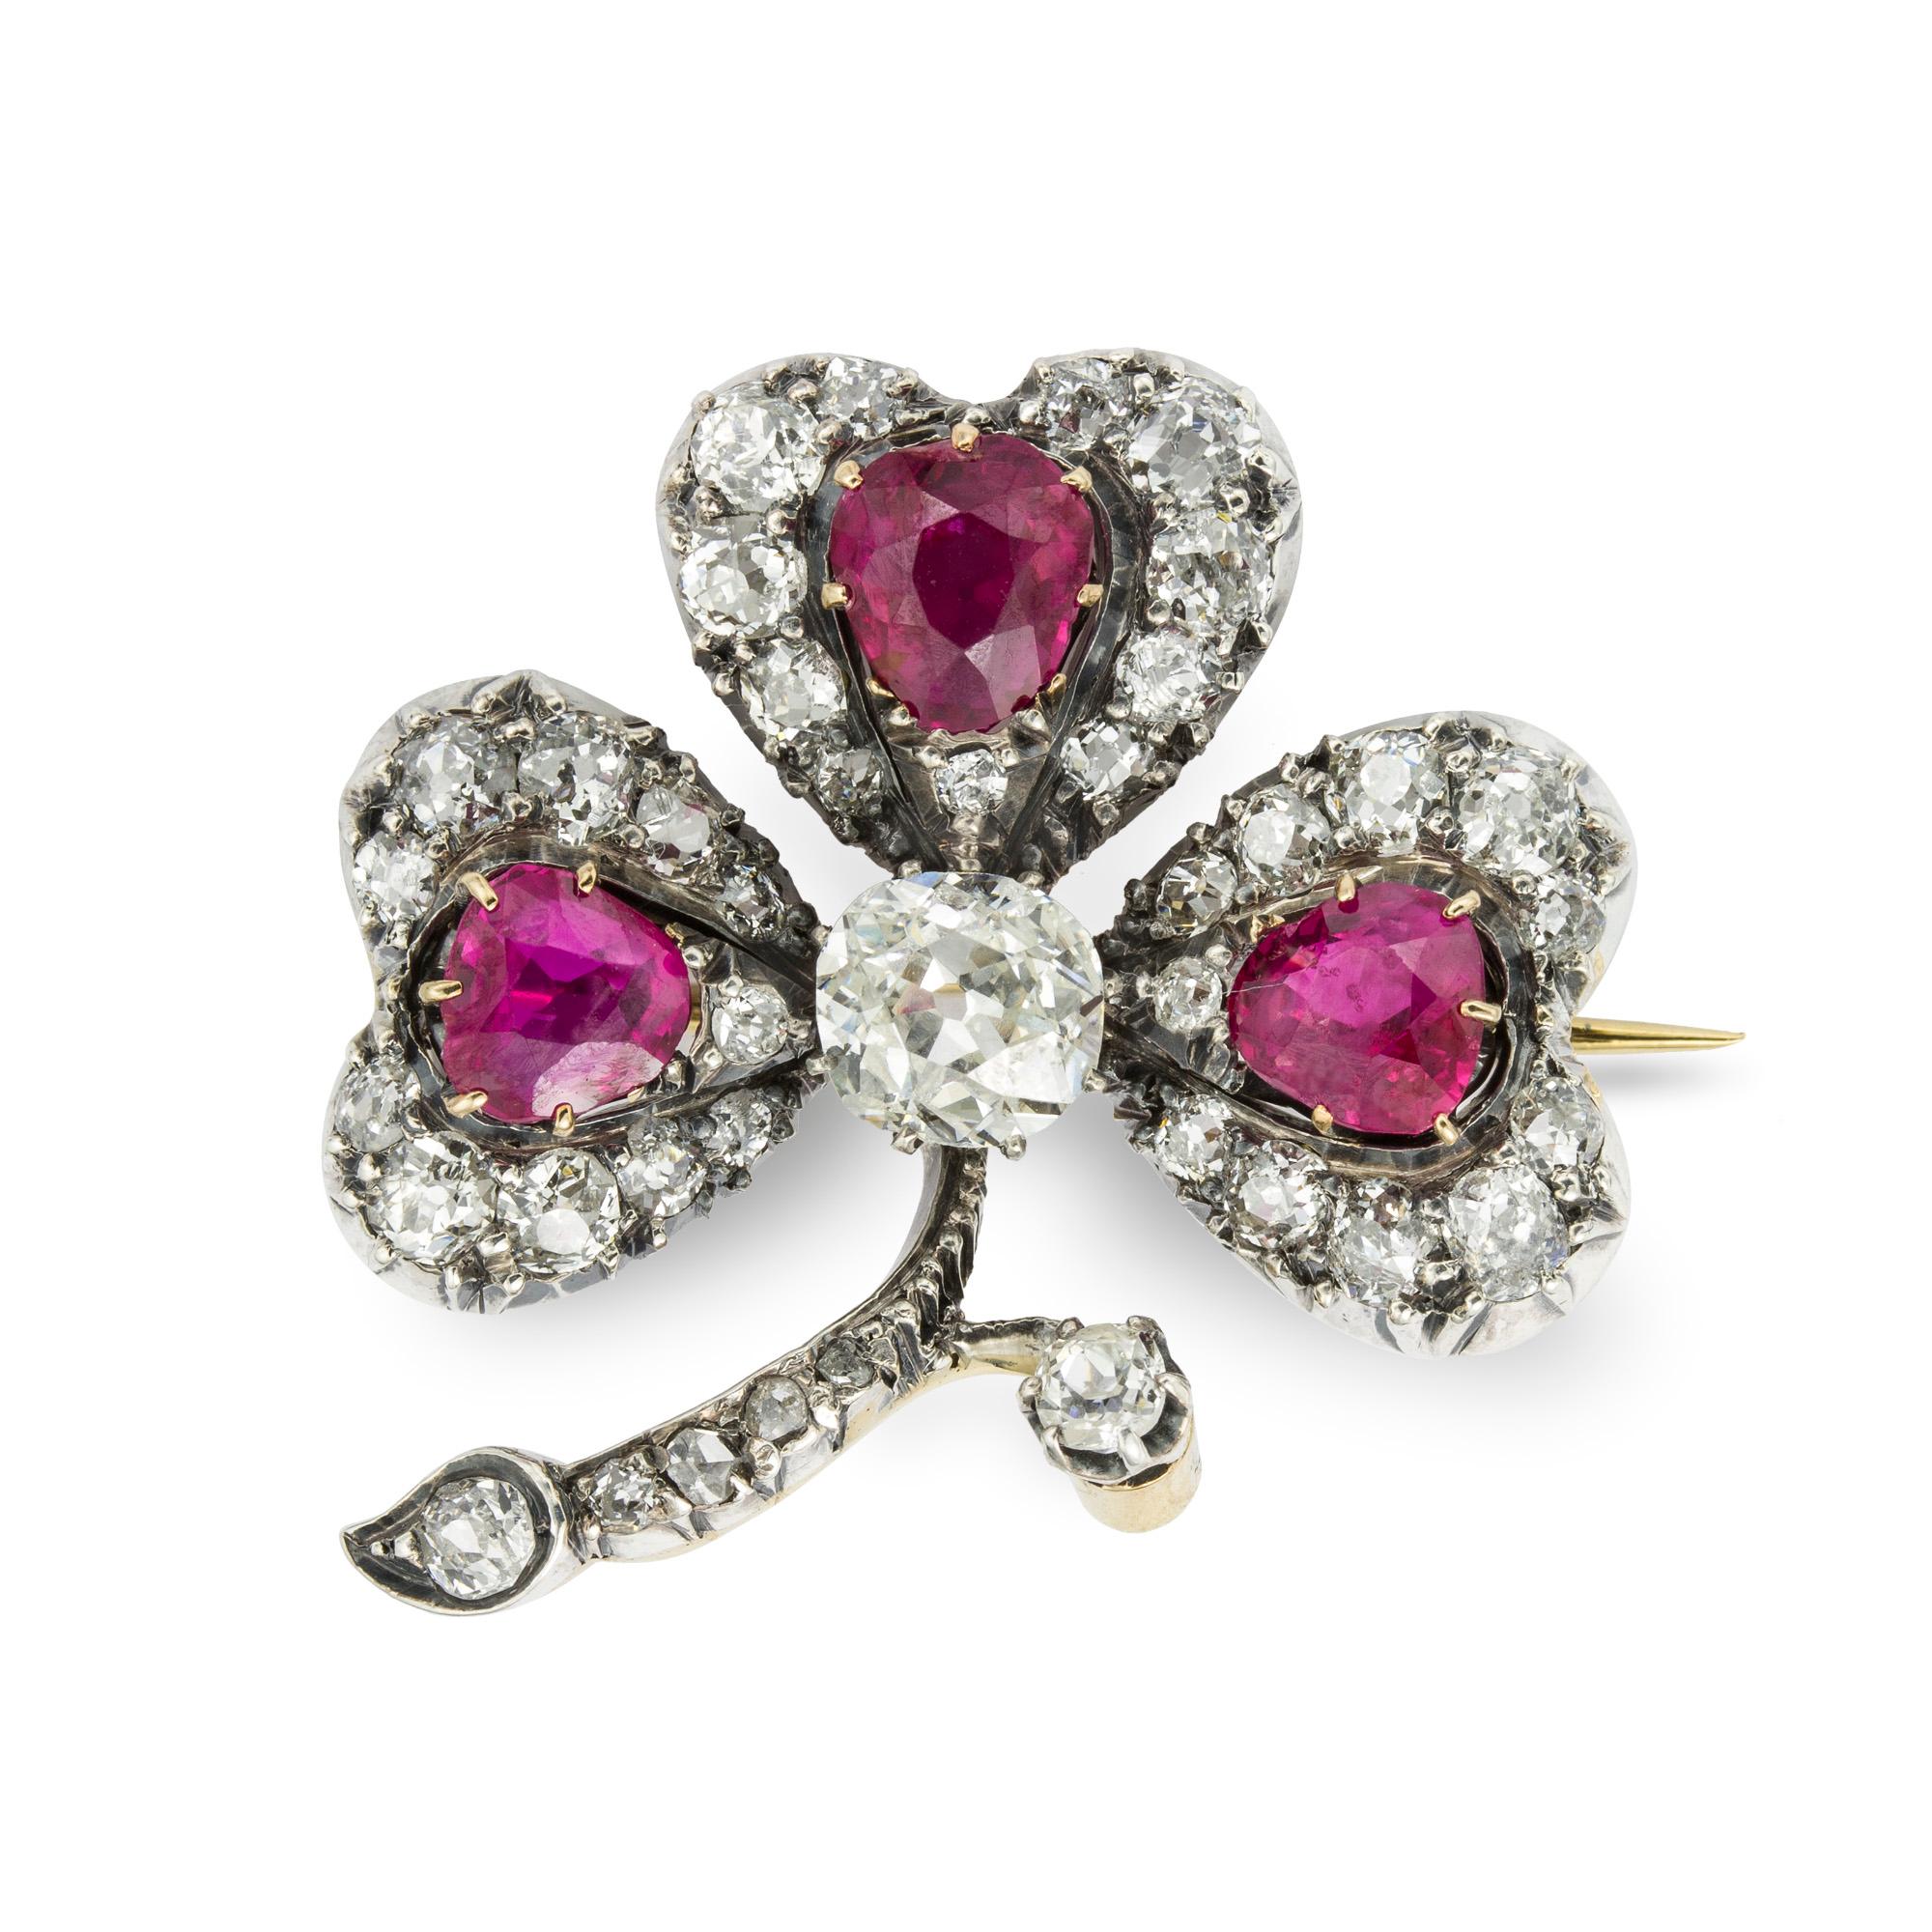 Art Nouveau An Early 20th Century Ruby And Diamond Clover Brooch For Sale